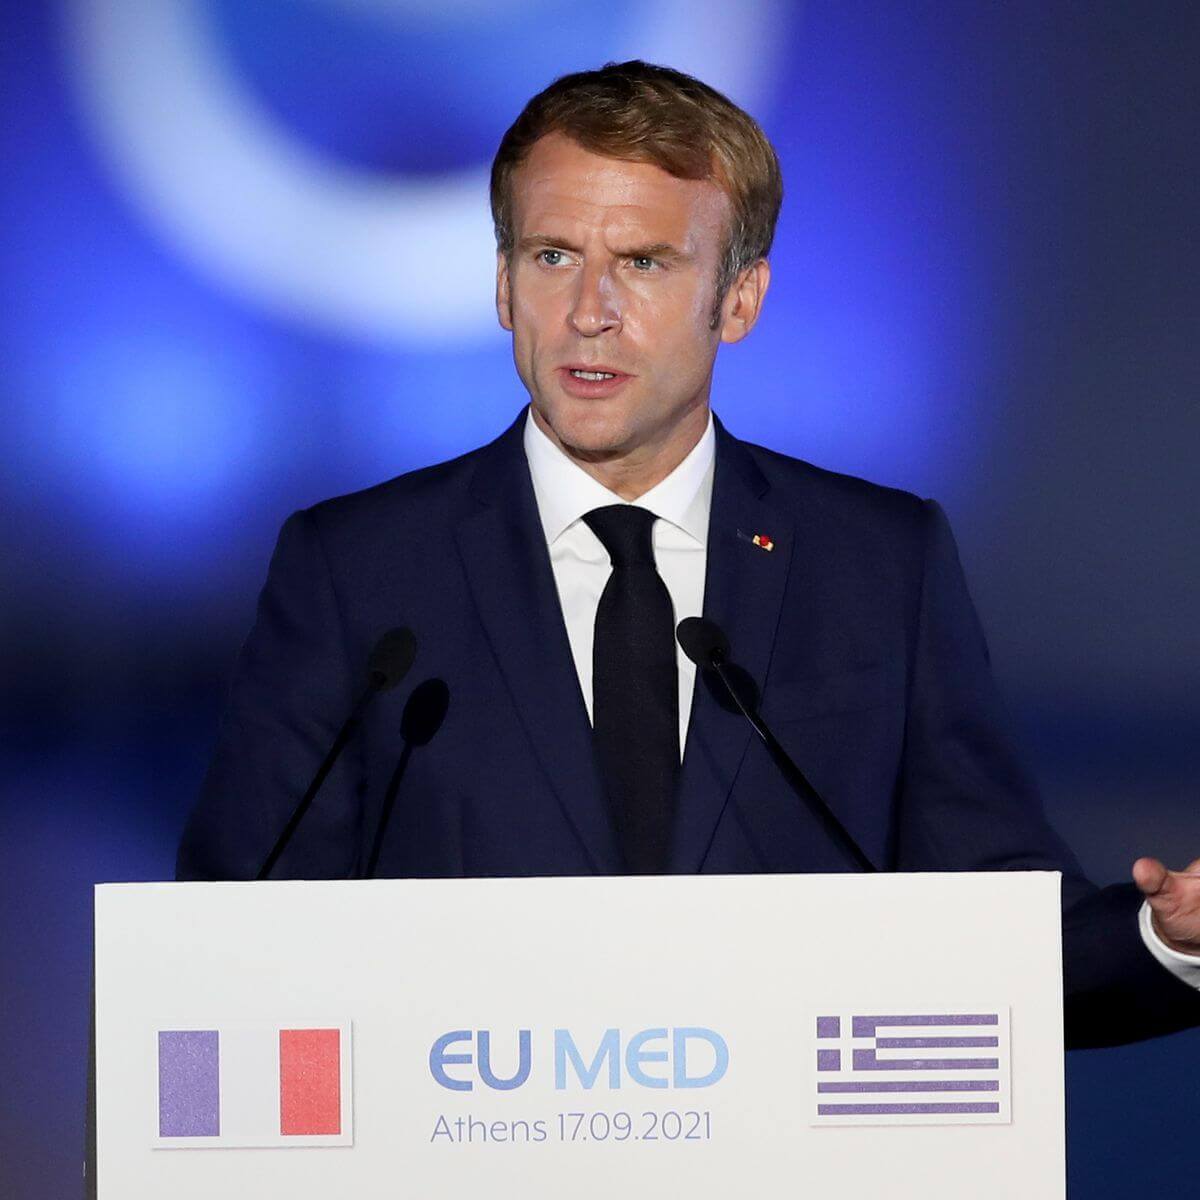 Macron Unveils France’s Climate, Rule of Law, Migration Plans During EU Presidency